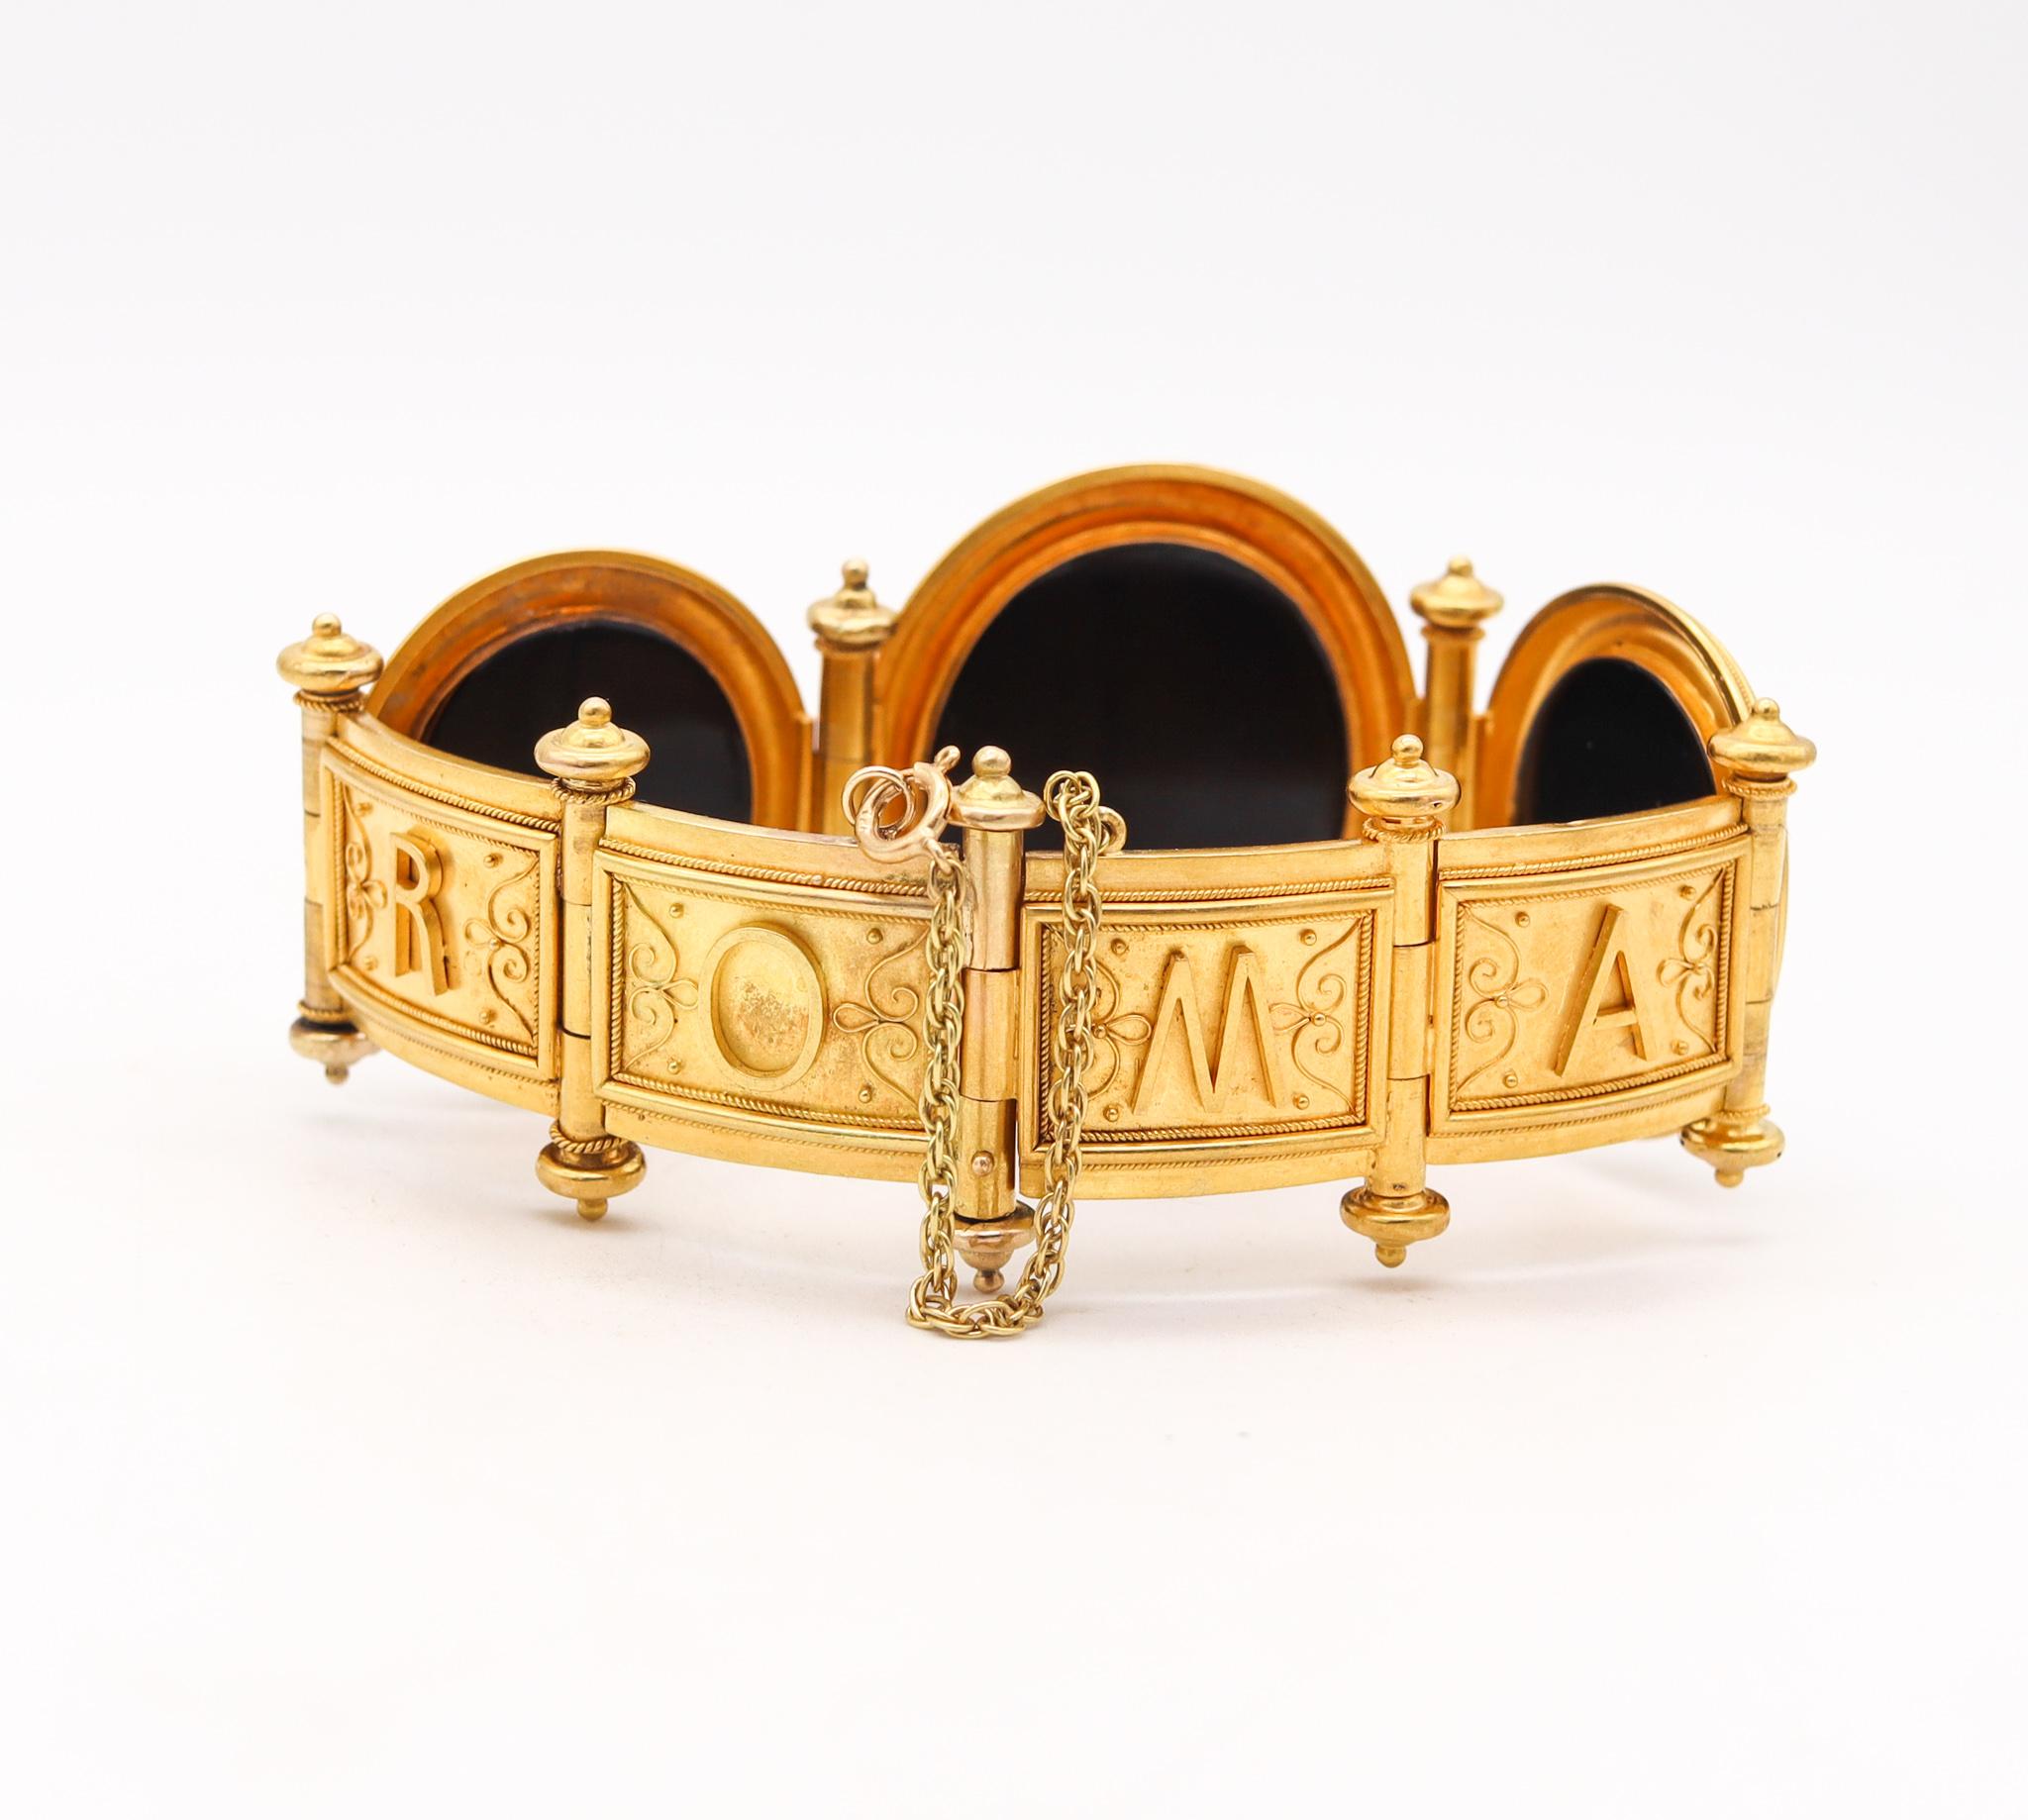 Roman grand tour Etruscan Revival Ricordi bracelet.

Magnificent historical piece, created in Roma Italy during the Papal States period back in the middle of the 19th century, circa 1850. This fabulous Grand Tour bracelet has been crafted with